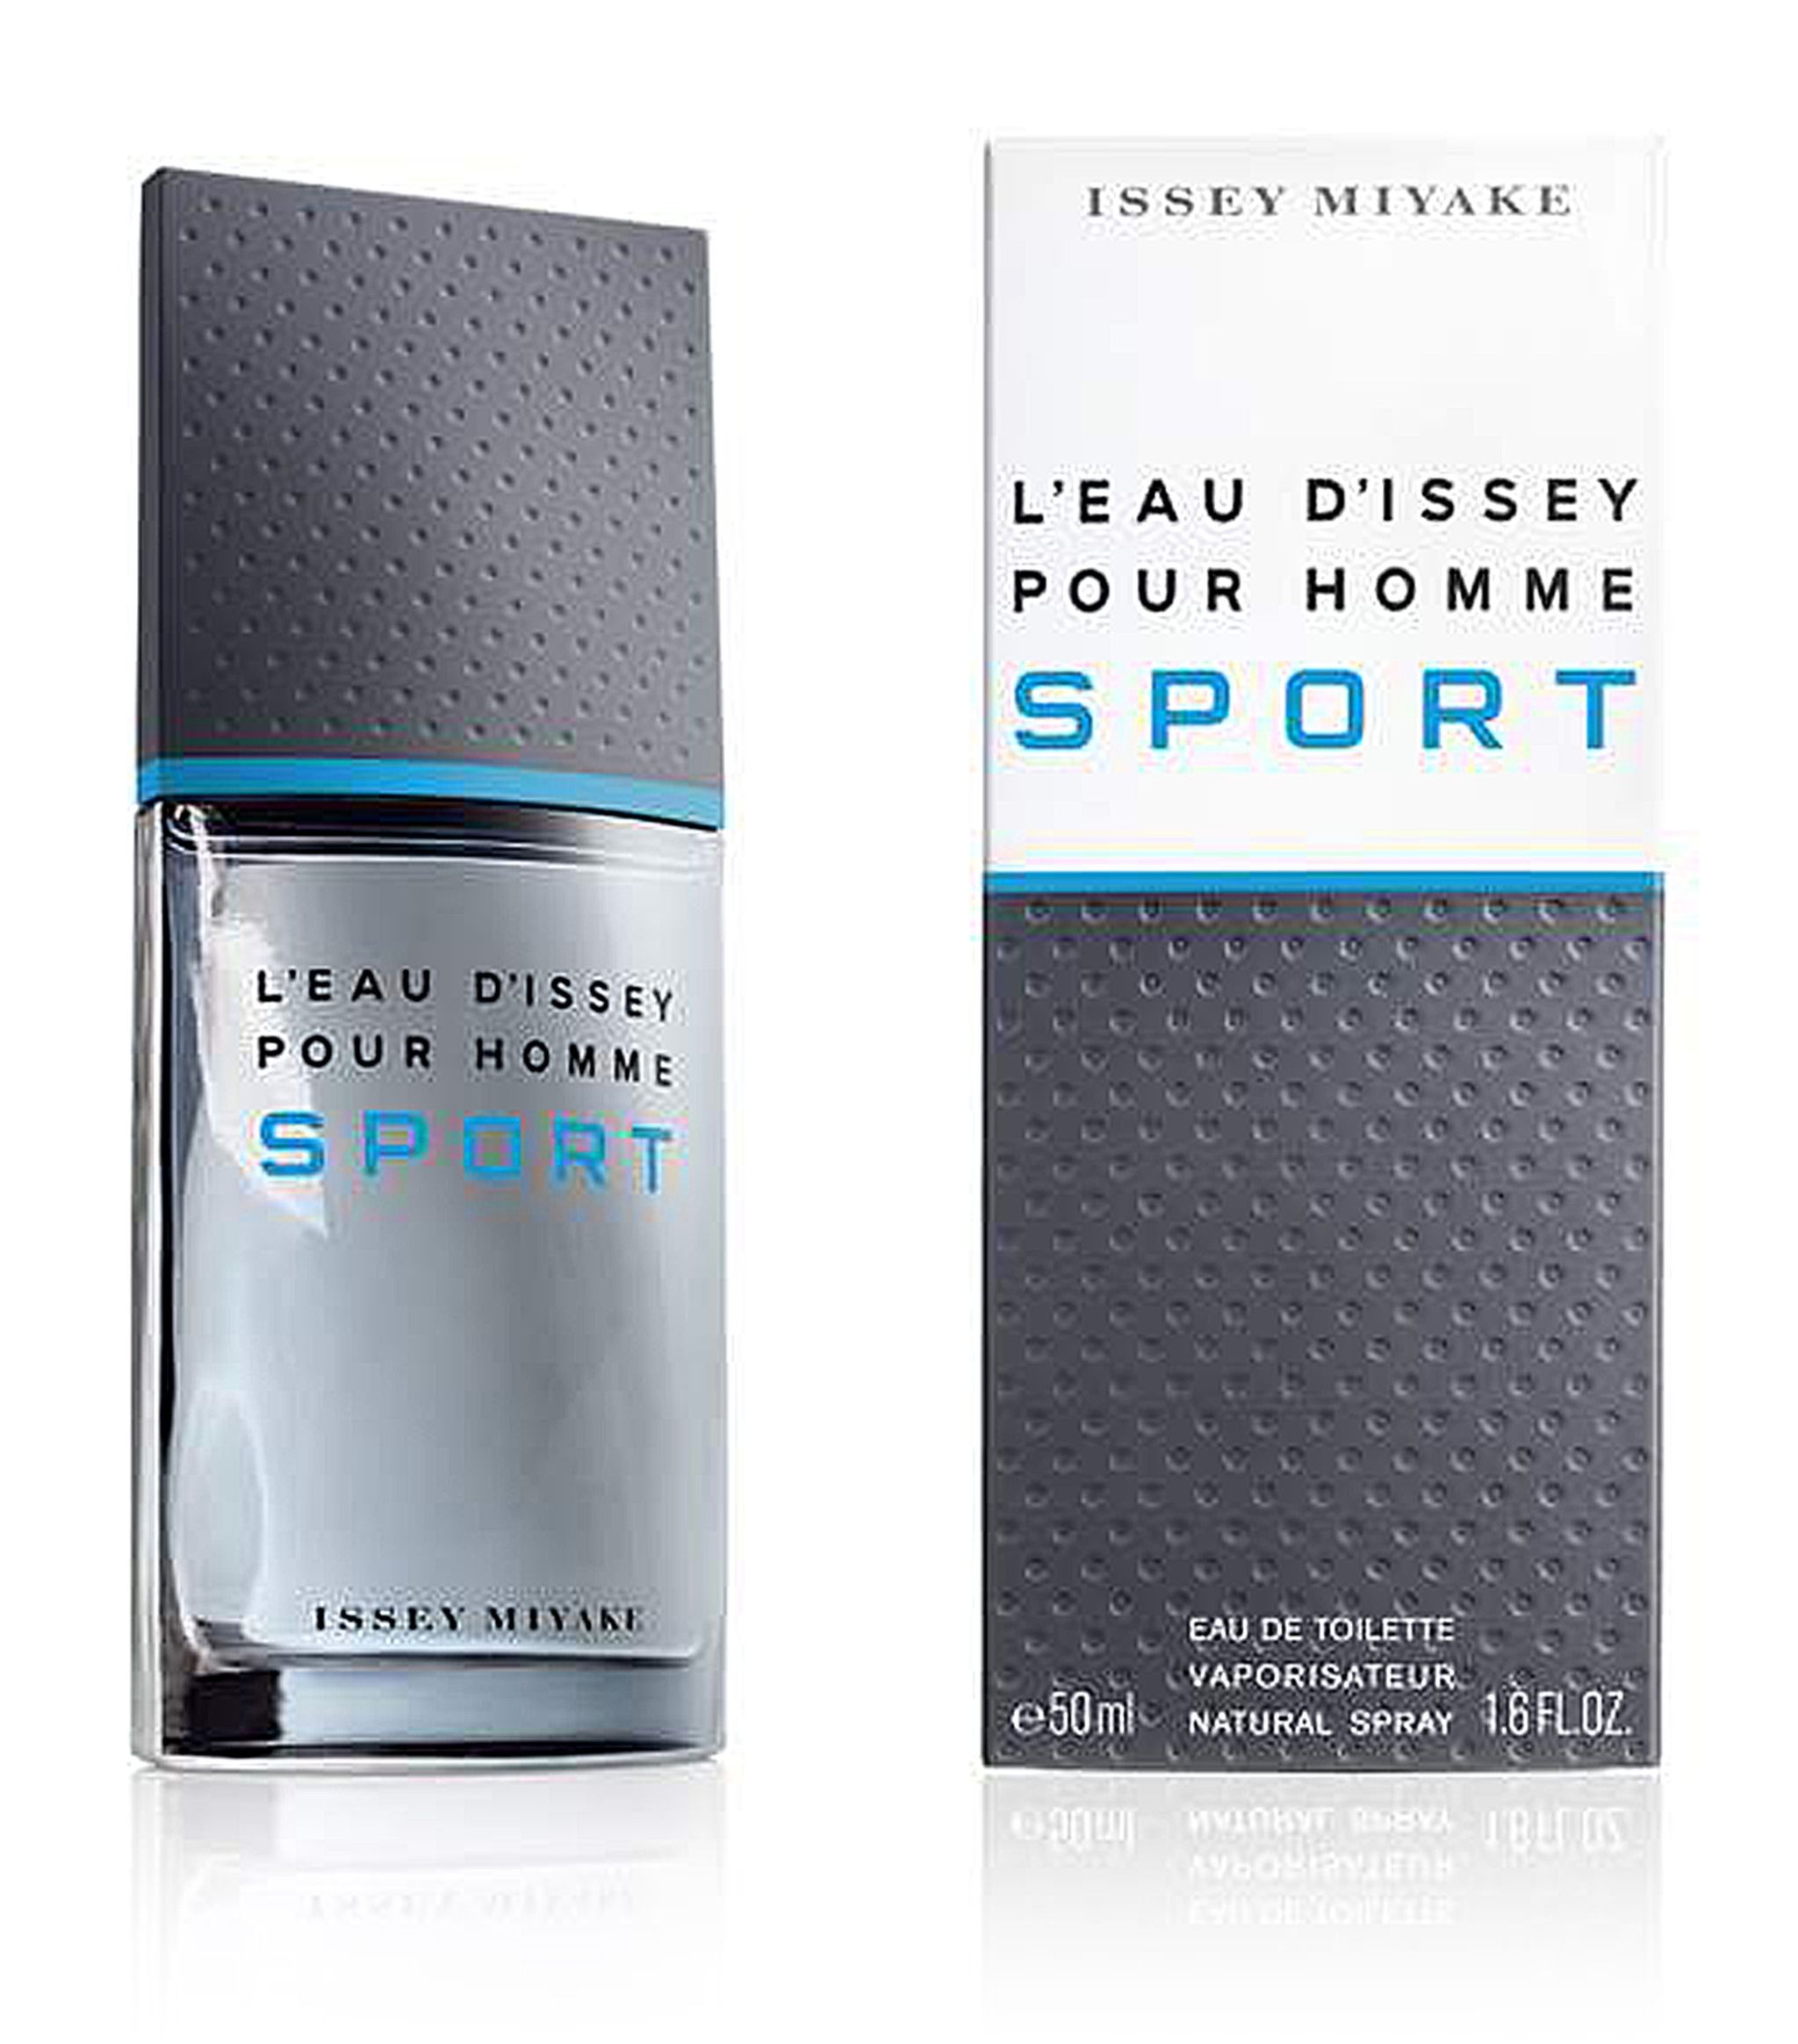 ISSEY MIYAKE L’Eau d’Issey Pour Homme Sport 100ml EDT Spray – Parfum Drops